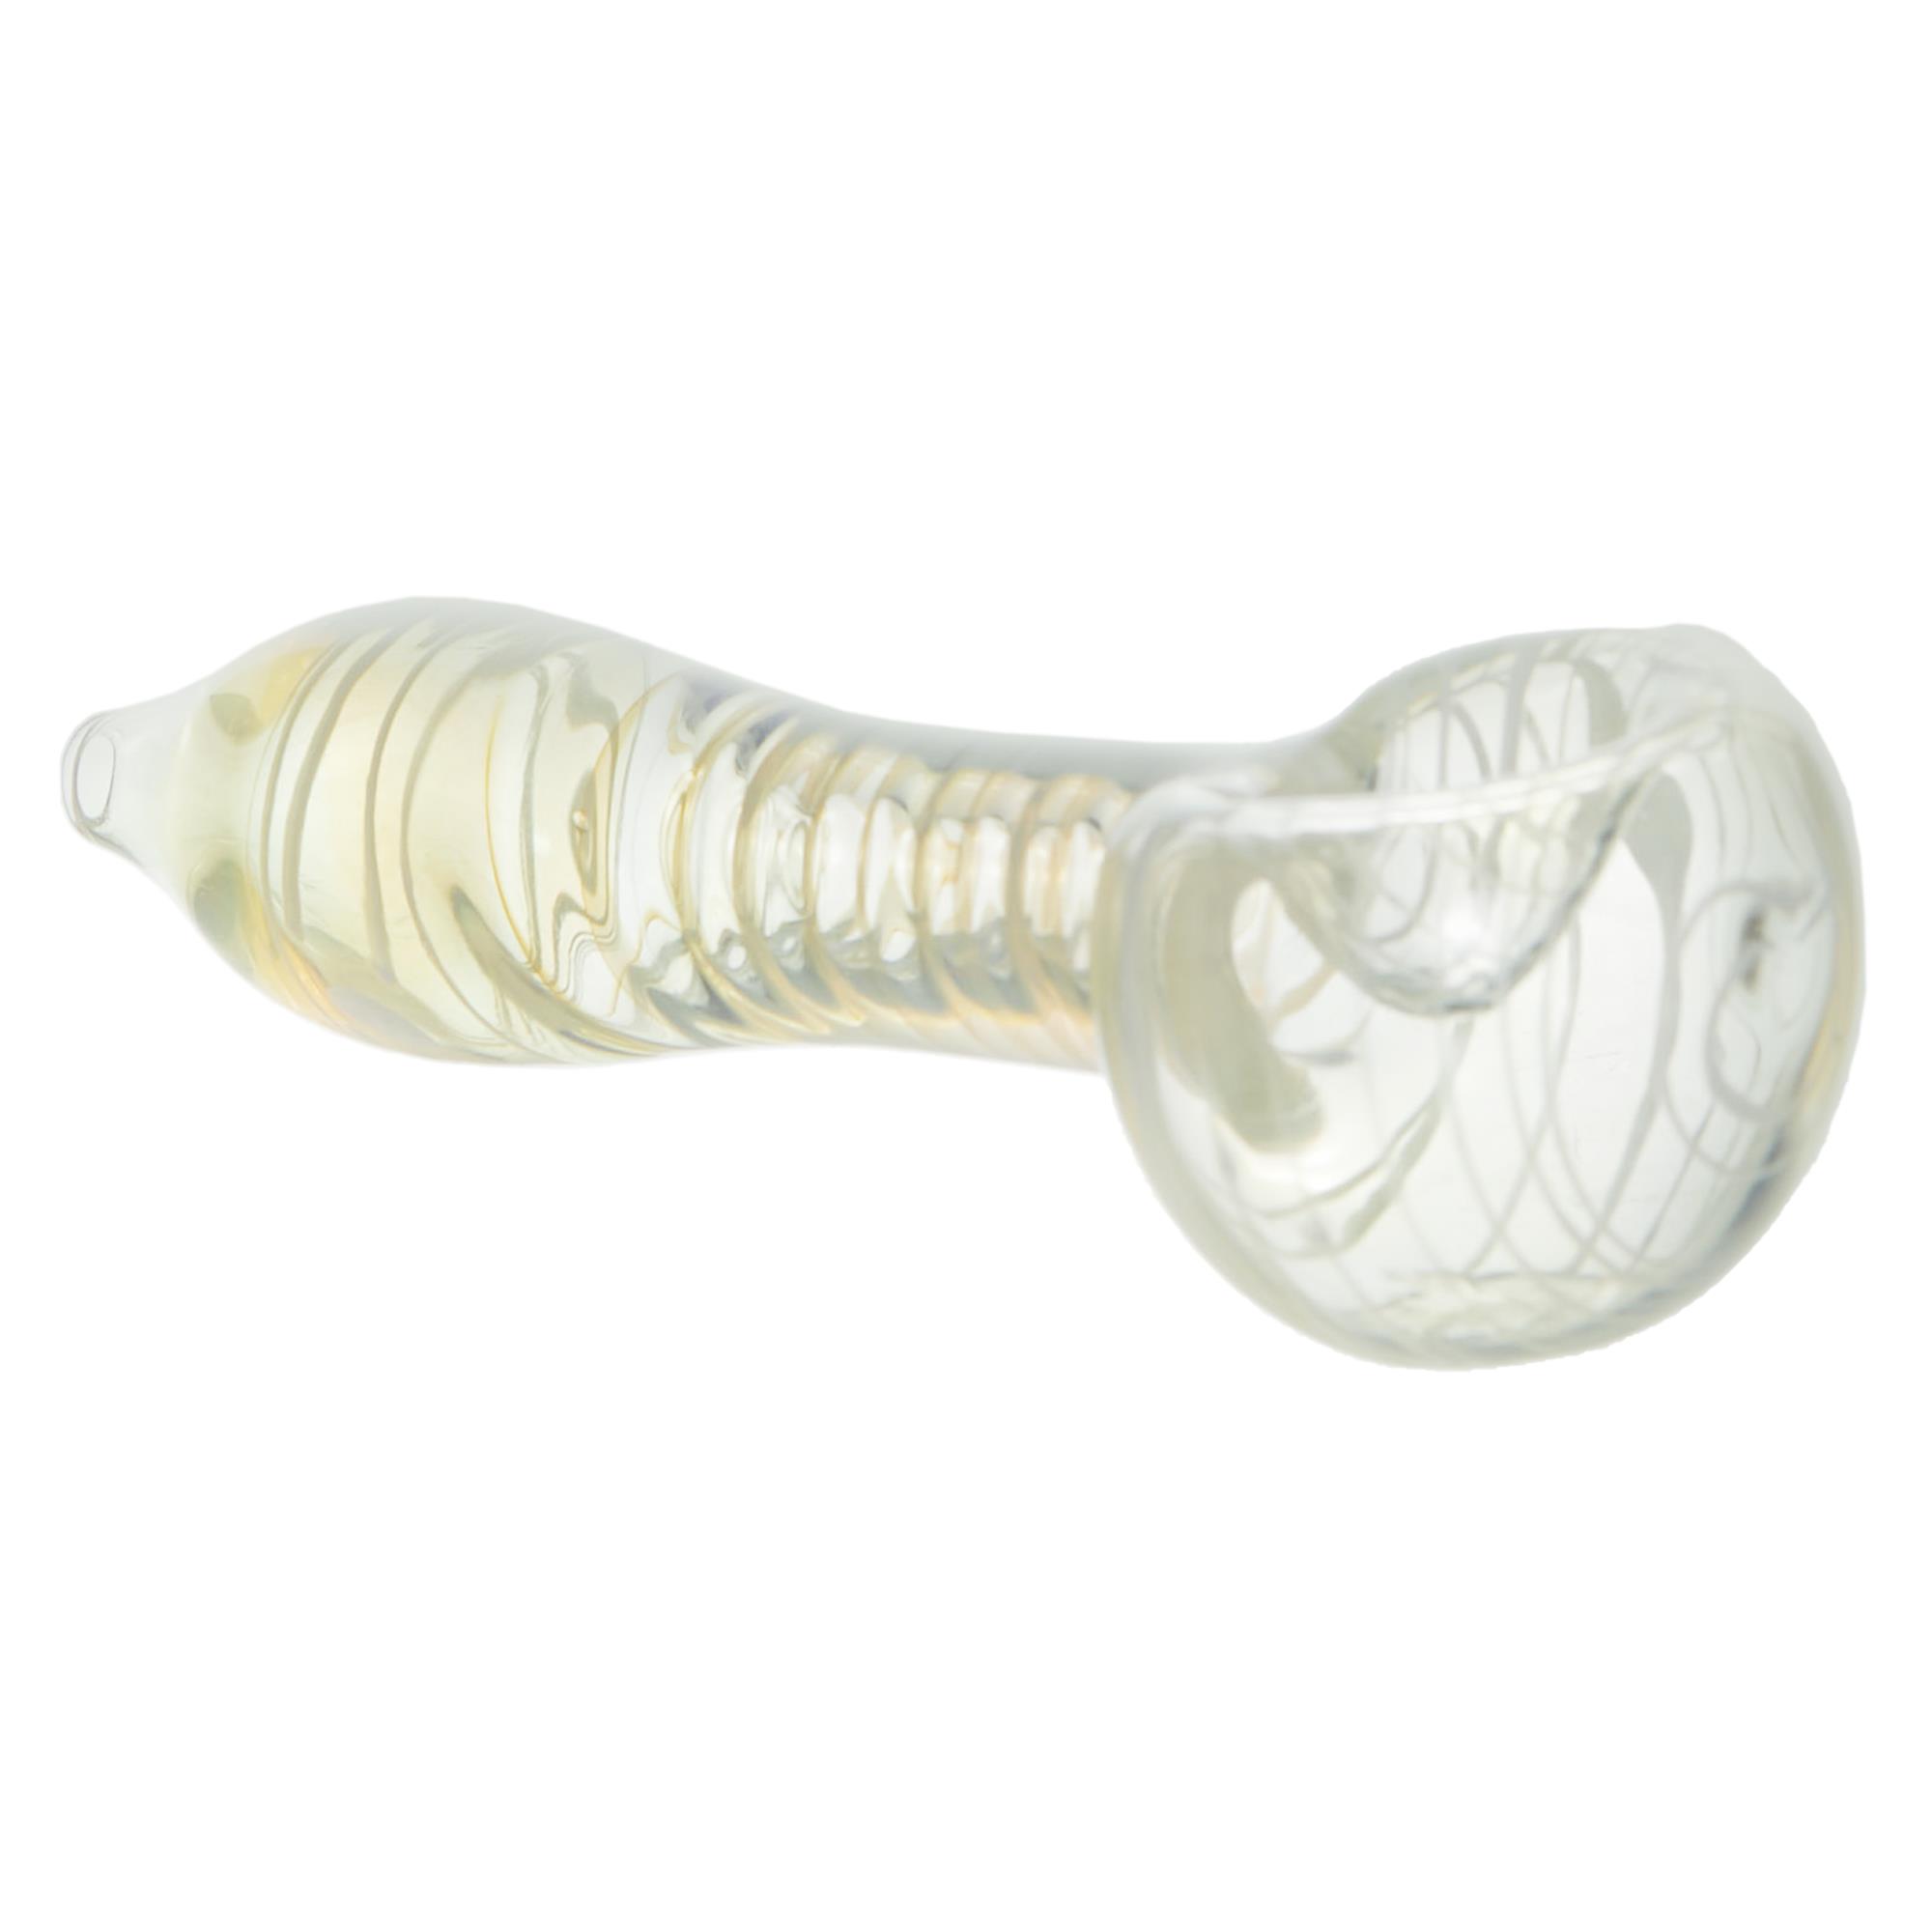 EXTRA DOPE GLASS SPOON HAND PIPE